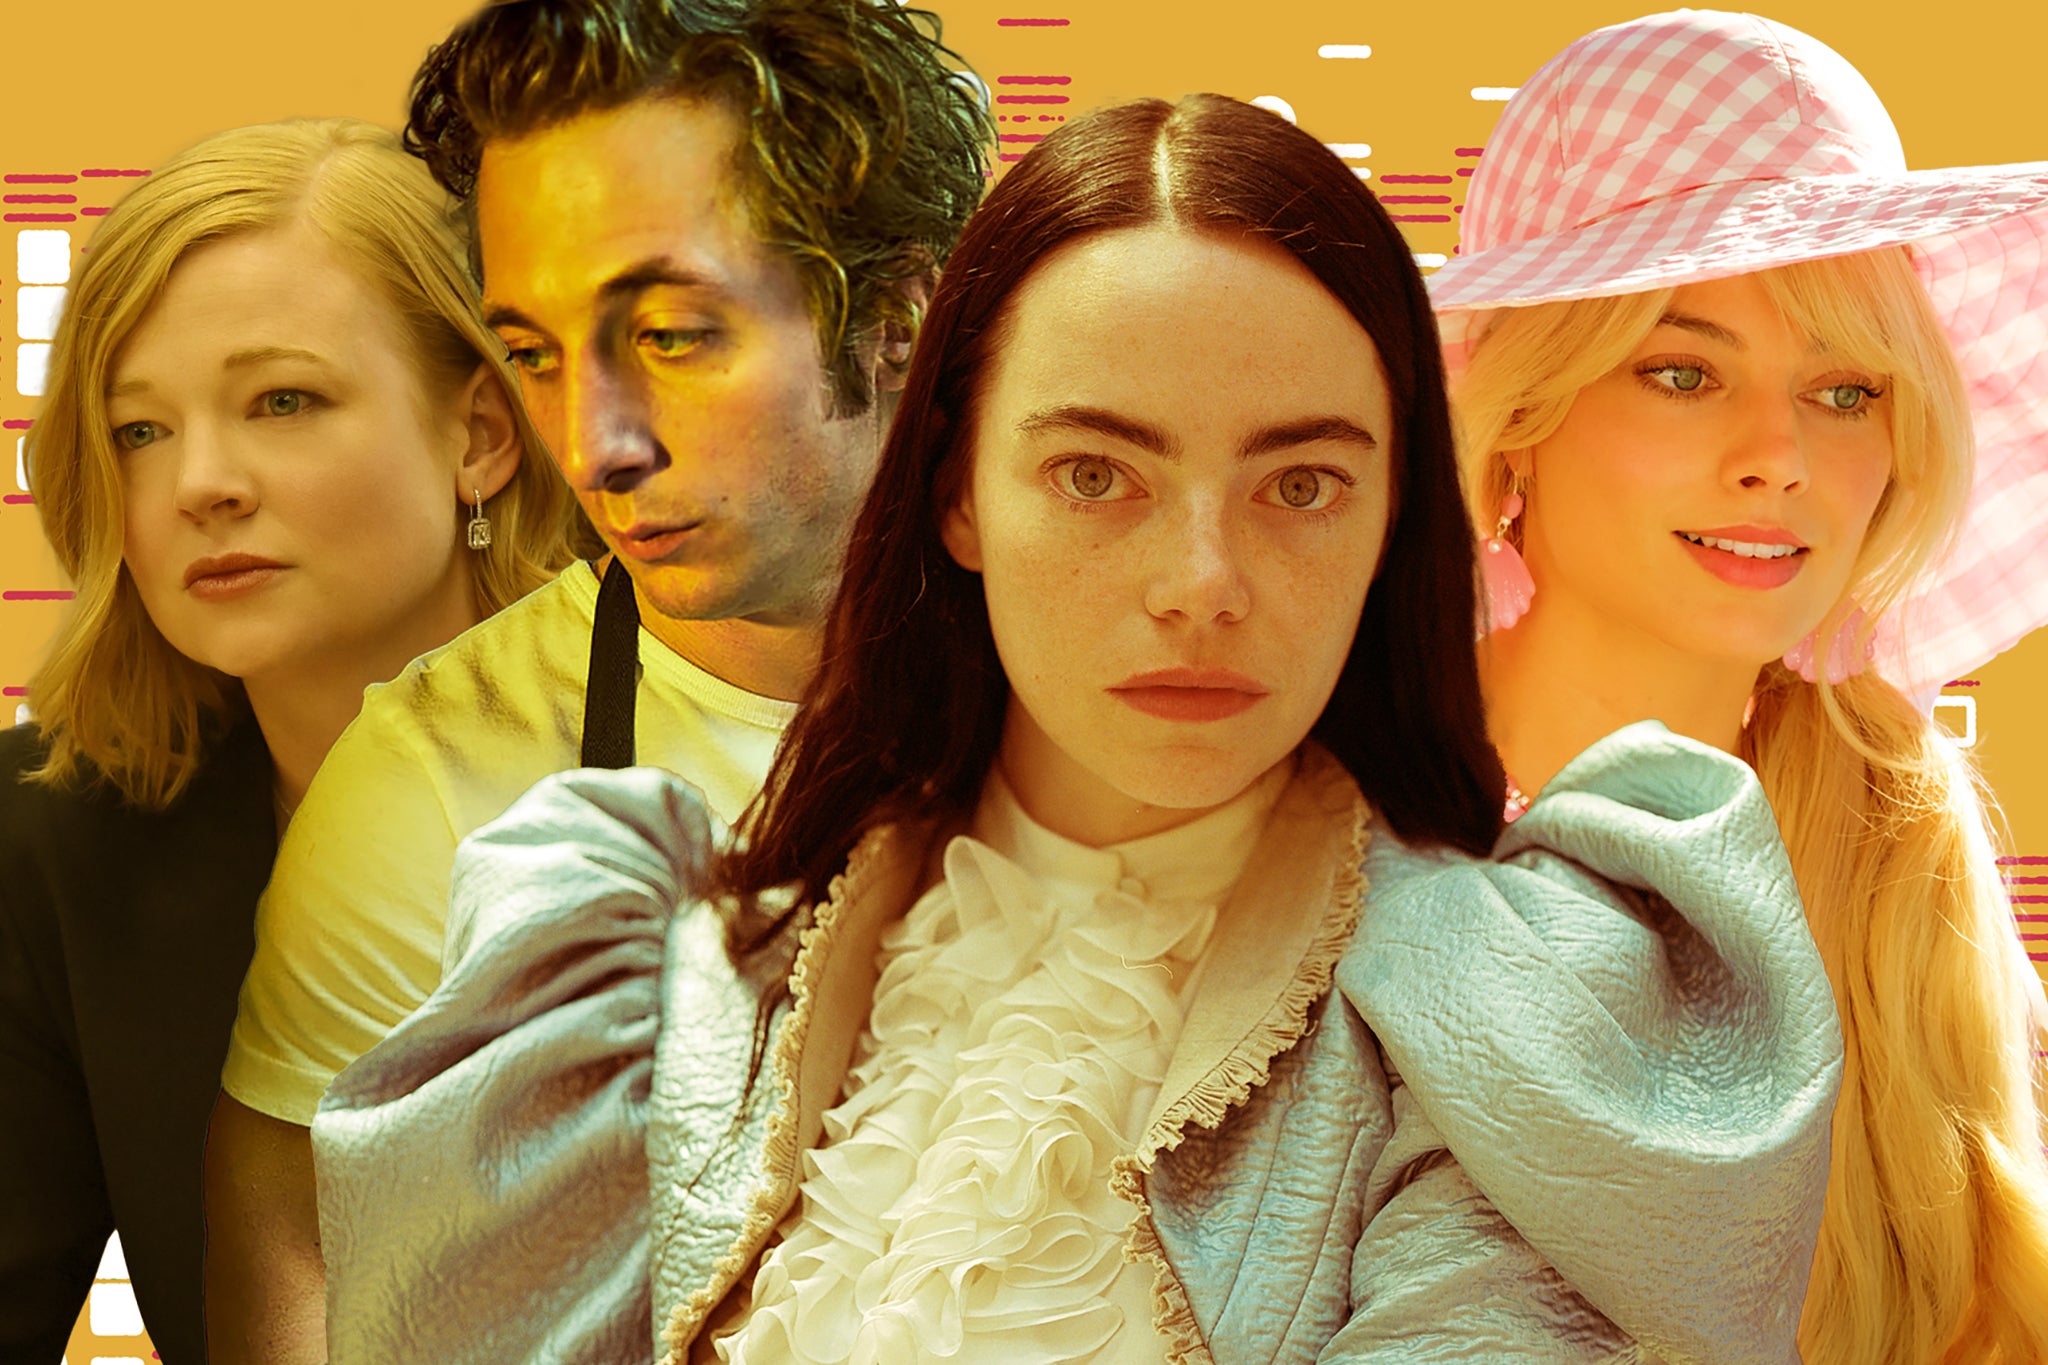 Winners or losers? Sarah Snook, Jeremy Allen White, Emma Stone and Margot Robbie are all in the frame for this year’s Golden Globes